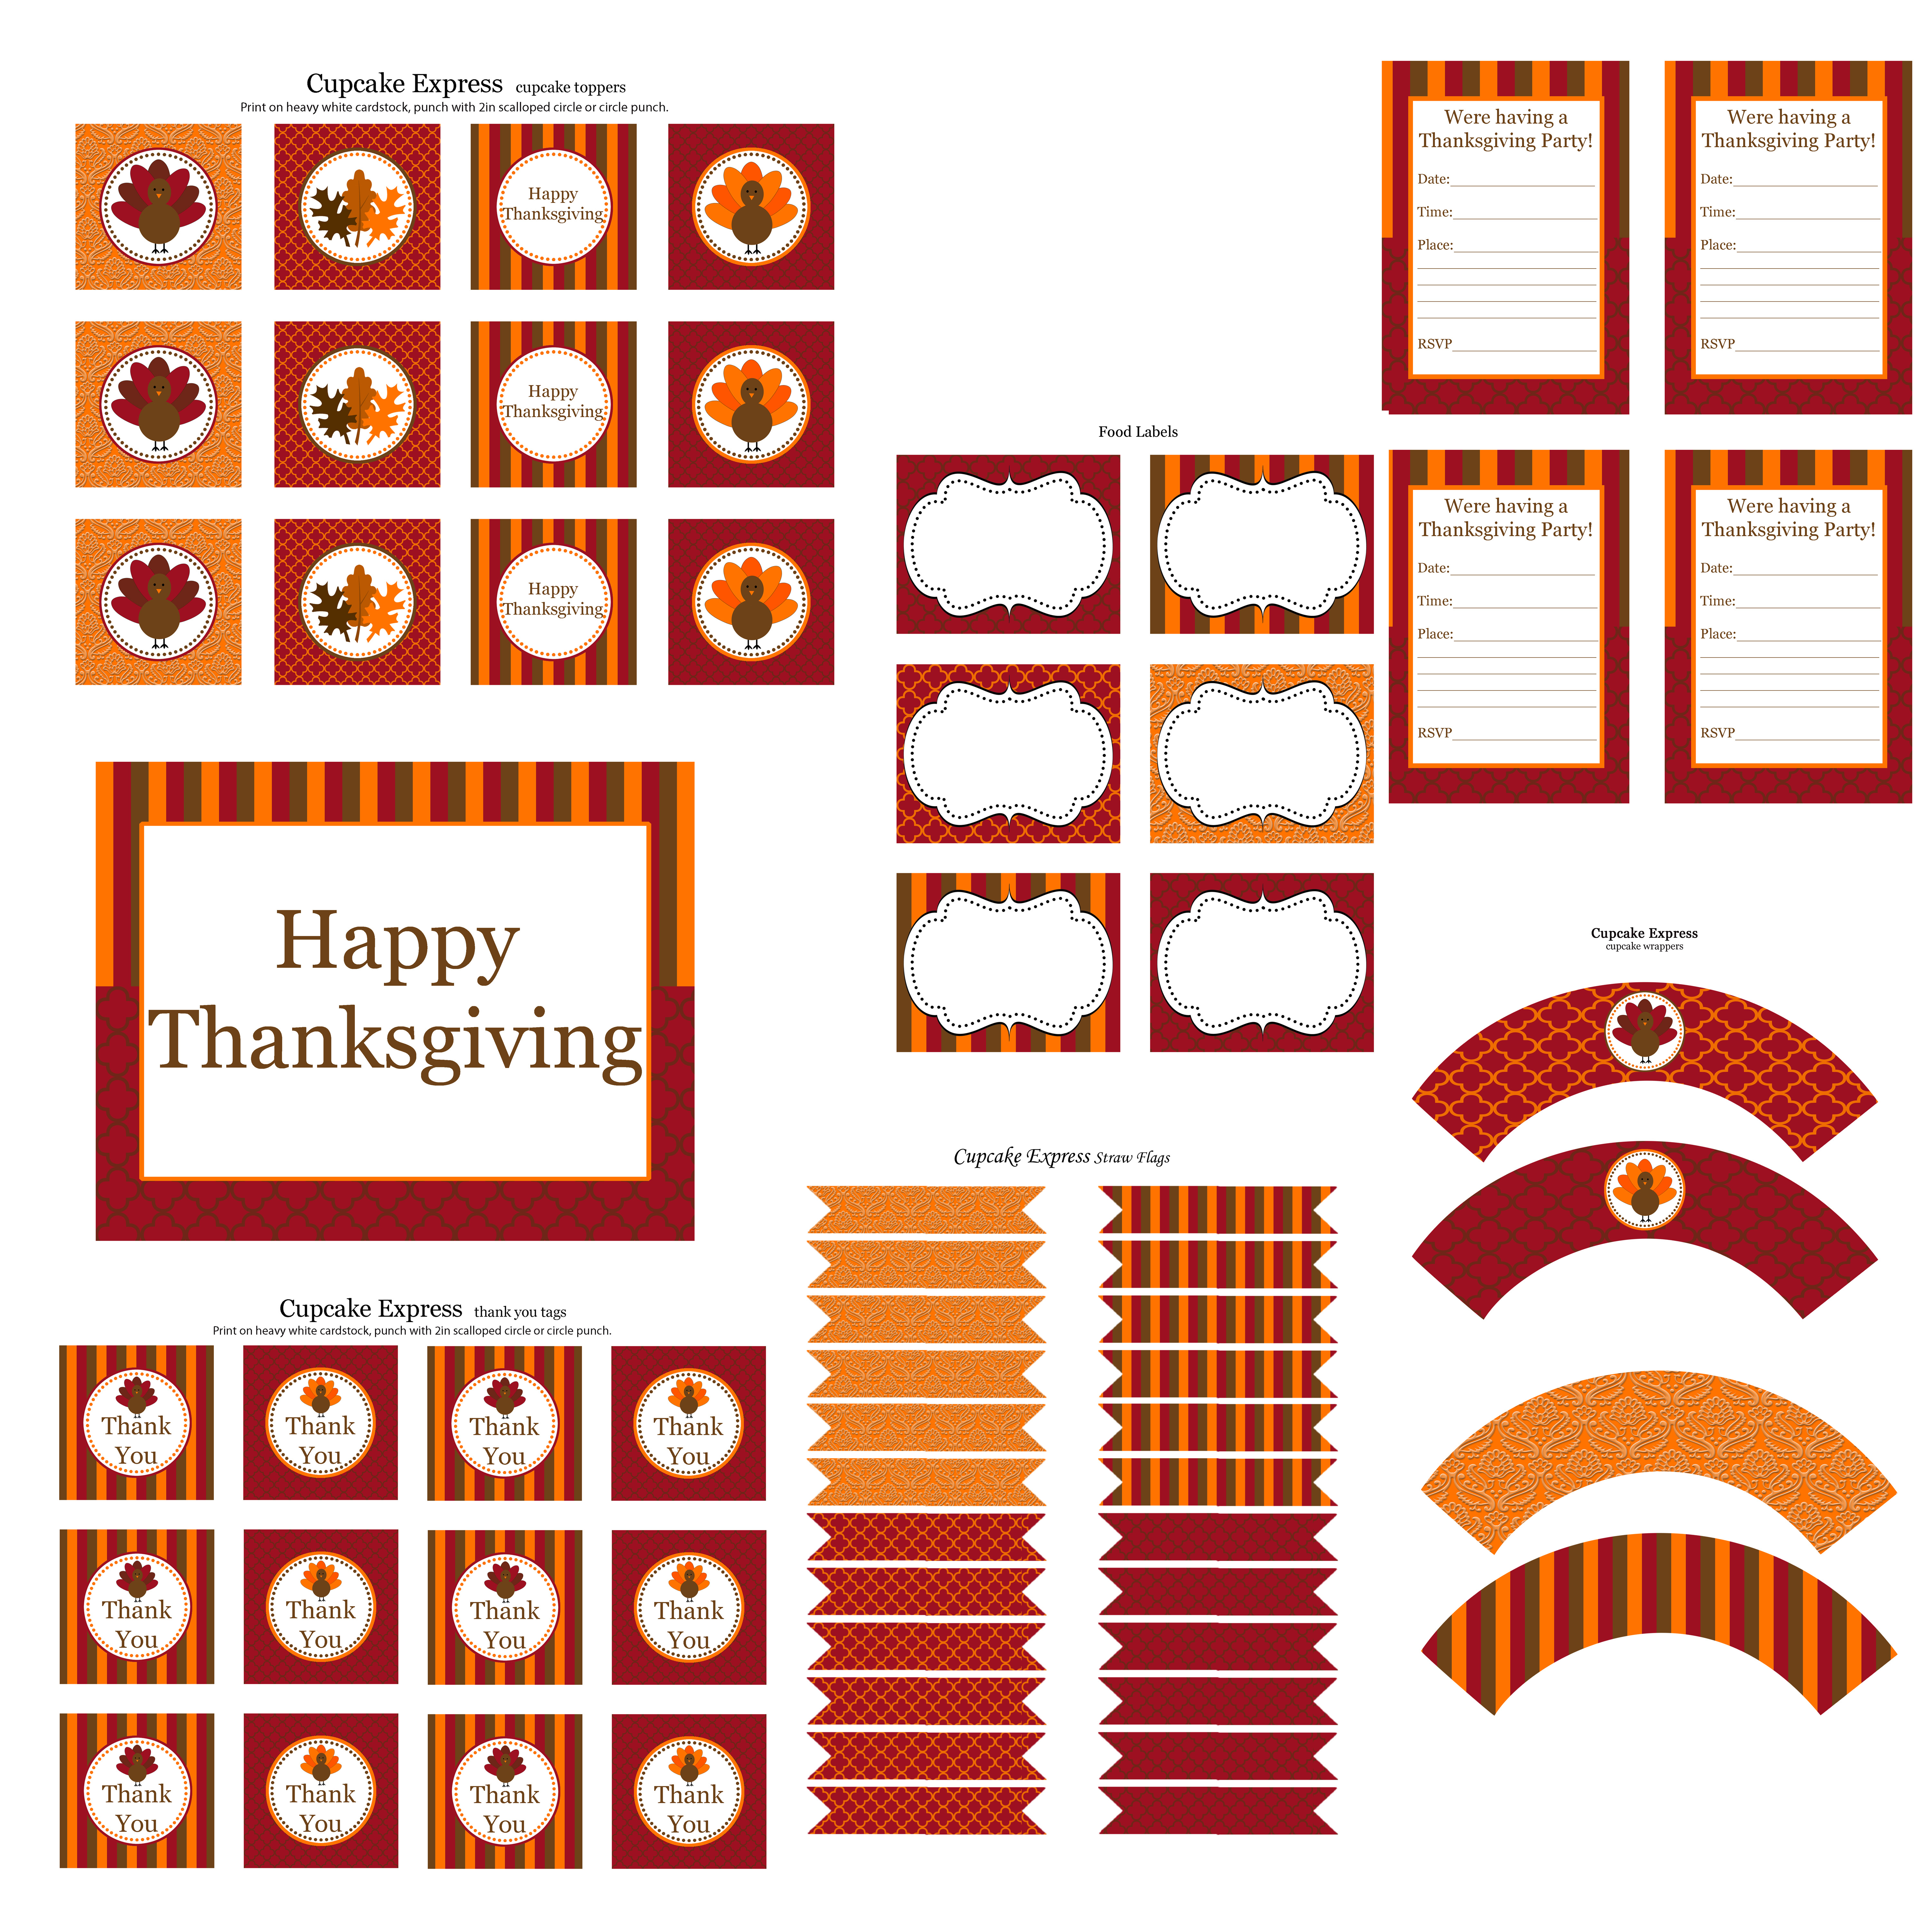 Free Thanksgiving Party Printables From Cupcake Express | Catch My Party - Thanksgiving Cupcake Toppers Printable Free